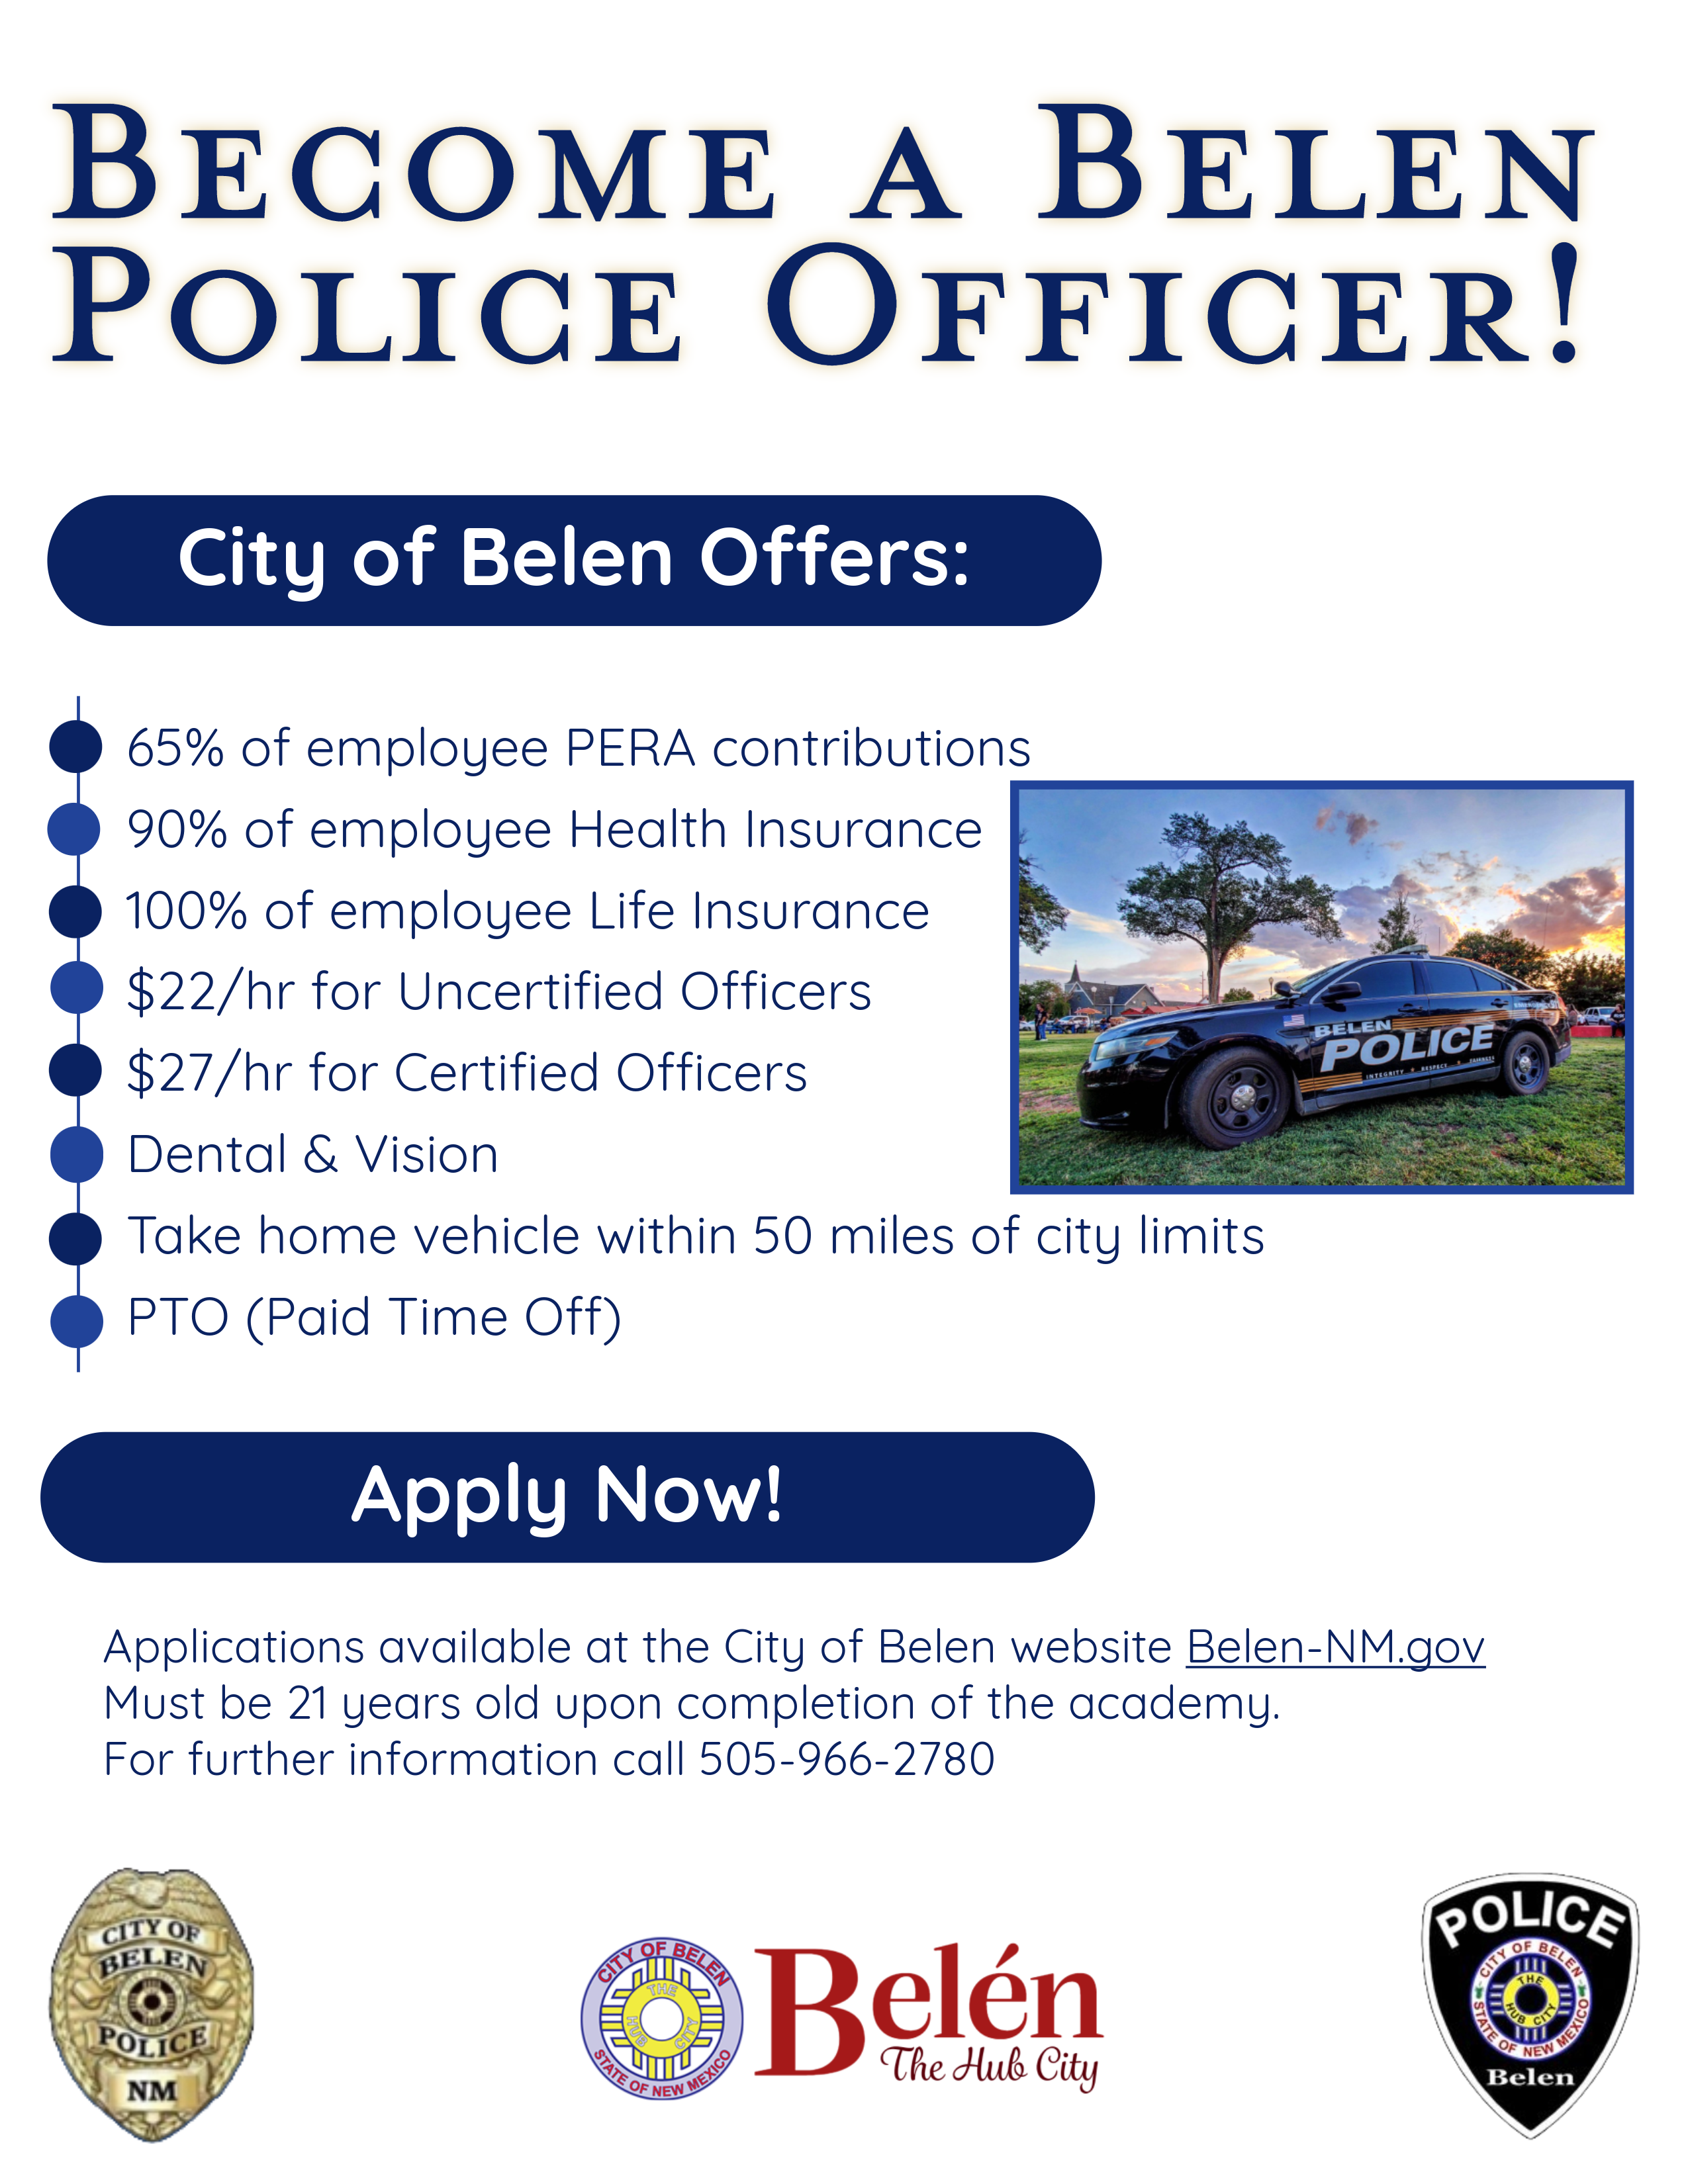 The Belen Police Department is actively seeking highly motivated individuals who wish to begin a rewarding career in law enforcement to join our team. There is a physical exam date on Saturday June 24th at 9am at the Belen high School 1619 Delgado Ave Belen, NM 87002. The Belen Police Department offers competitive pay and an outstanding benefit package.  If you are interested in the fast pace and exciting career, then we want to talk with you.  Please contact Detective Joe Rodriguez at 505-966-2759 for more information. 